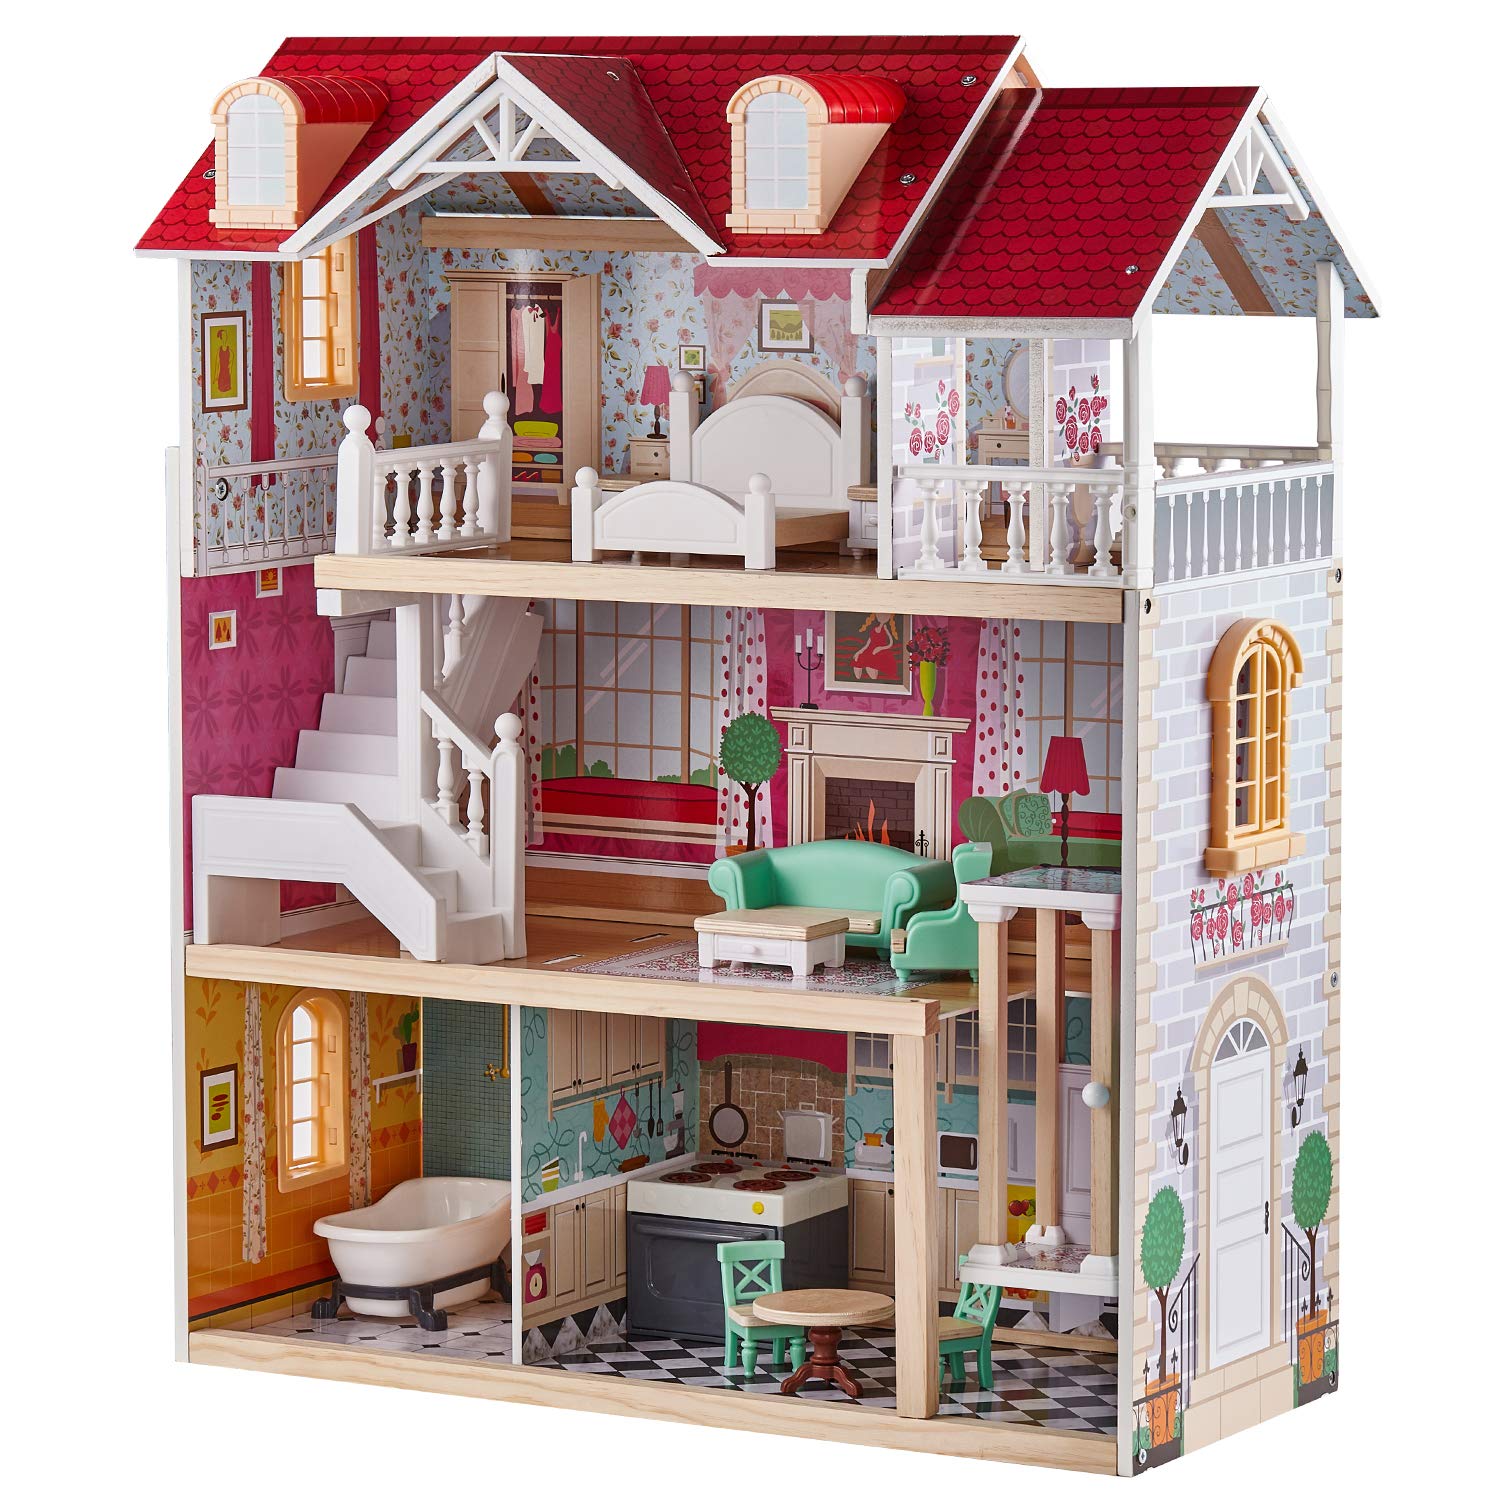 Best Dollhouses 2022: Wooden Doll House from Top Bright 2022